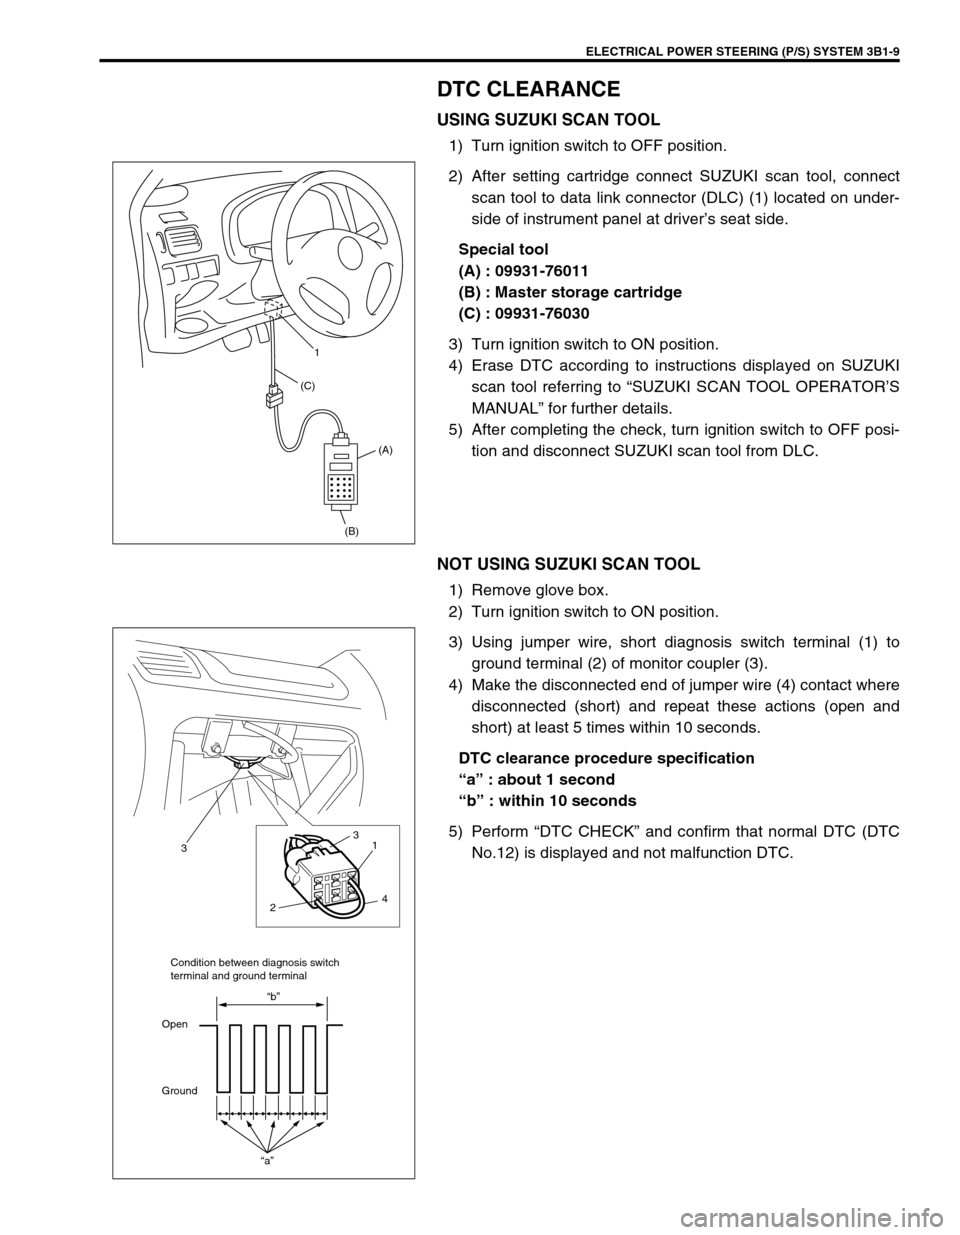 SUZUKI SWIFT 2000 1.G RG413 Service Workshop Manual ELECTRICAL POWER STEERING (P/S) SYSTEM 3B1-9
DTC CLEARANCE
USING SUZUKI SCAN TOOL
1) Turn ignition switch to OFF position.
2) After setting cartridge connect SUZUKI scan tool, connect
scan tool to dat